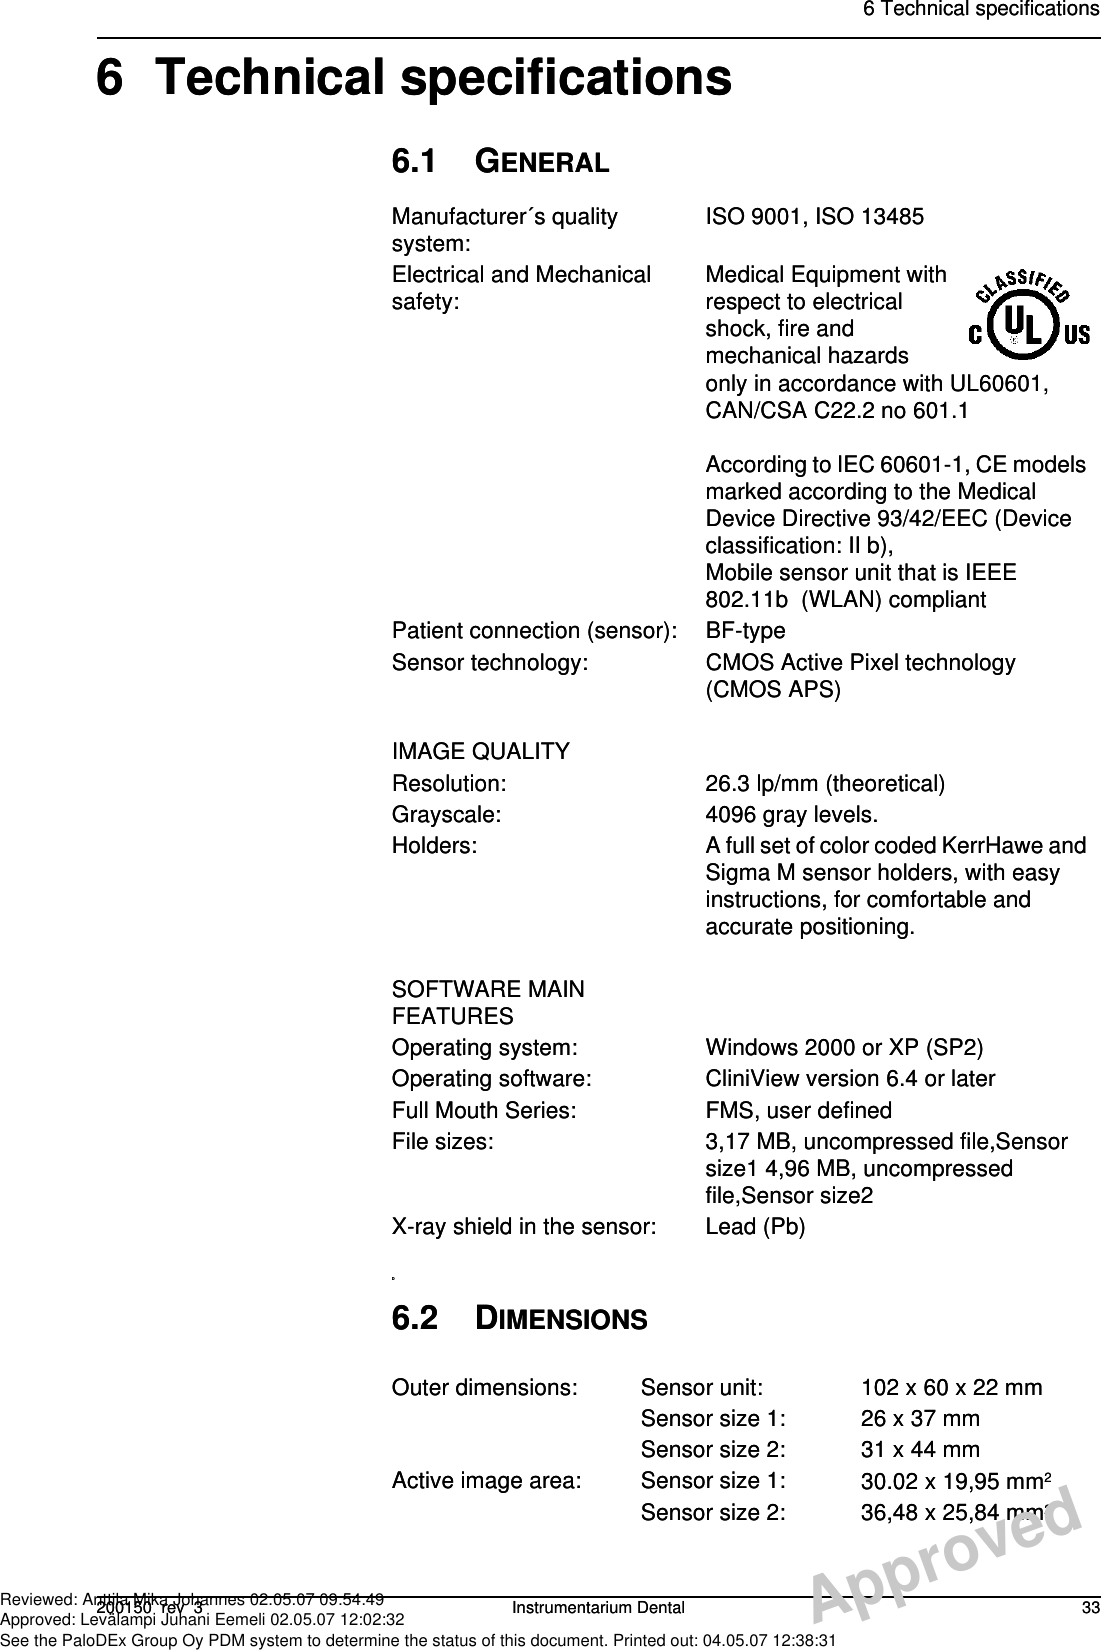 6 Technical specifications200150  rev  3 Instrumentarium Dental 336 Technical specifications6.1 GENERALDManufacturer´s quality system: ISO 9001, ISO 13485Electrical and Mechanical safety: Medical Equipment with respect to electrical shock, fire and mechanical hazards only in accordance with UL60601, CAN/CSA C22.2 no 601.1According to IEC 60601-1, CE models marked according to the Medical Device Directive 93/42/EEC (Device classification: II b),Mobile sensor unit that is IEEE 802.11b  (WLAN) compliantPatient connection (sensor): BF-typeSensor technology: CMOS Active Pixel technology (CMOS APS)IMAGE QUALITYResolution: 26.3 lp/mm (theoretical)Grayscale: 4096 gray levels.Holders: A full set of color coded KerrHawe and Sigma M sensor holders, with easy instructions, for comfortable and accurate positioning.SOFTWARE MAIN FEATURESOperating system: Windows 2000 or XP (SP2)Operating software: CliniView version 6.4 or laterFull Mouth Series: FMS, user definedFile sizes: 3,17 MB, uncompressed file,Sensor size1 4,96 MB, uncompressed file,Sensor size2X-ray shield in the sensor: Lead (Pb)6.2 DIMENSIONSOuter dimensions: Sensor unit: 102 x 60 x 22 mmSensor size 1: 26 x 37 mmSensor size 2: 31 x 44 mmActive image area: Sensor size 1: 30.02 x 19,95 mm2Sensor size 2: 36,48 x 25,84 mm26 Technical specifications200150  rev  3 Instrumentarium Dental 336 Technical specifications6.1 GENERALDManufacturer´s quality system: ISO 9001, ISO 13485Electrical and Mechanical safety: Medical Equipment with respect to electrical shock, fire and mechanical hazards only in accordance with UL60601, CAN/CSA C22.2 no 601.1According to IEC 60601-1, CE models marked according to the Medical Device Directive 93/42/EEC (Device classification: II b),Mobile sensor unit that is IEEE 802.11b  (WLAN) compliantPatient connection (sensor): BF-typeSensor technology: CMOS Active Pixel technology (CMOS APS)IMAGE QUALITYResolution: 26.3 lp/mm (theoretical)Grayscale: 4096 gray levels.Holders: A full set of color coded KerrHawe and Sigma M sensor holders, with easy instructions, for comfortable and accurate positioning.SOFTWARE MAIN FEATURESOperating system: Windows 2000 or XP (SP2)Operating software: CliniView version 6.4 or laterFull Mouth Series: FMS, user definedFile sizes: 3,17 MB, uncompressed file,Sensor size1 4,96 MB, uncompressed file,Sensor size2X-ray shield in the sensor: Lead (Pb)6.2 DIMENSIONSOuter dimensions: Sensor unit: 102 x 60 x 22 mmSensor size 1: 26 x 37 mmSensor size 2: 31 x 44 mmActive image area: Sensor size 1: 30.02 x 19,95 mm2Sensor size 2: 36,48 x 25,84 mm2ApprovedReviewed: Anttila Mika Johannes 02.05.07 09:54:49Approved: Levälampi Juhani Eemeli 02.05.07 12:02:32See the PaloDEx Group Oy PDM system to determine the status of this document. Printed out: 04.05.07 12:38:31